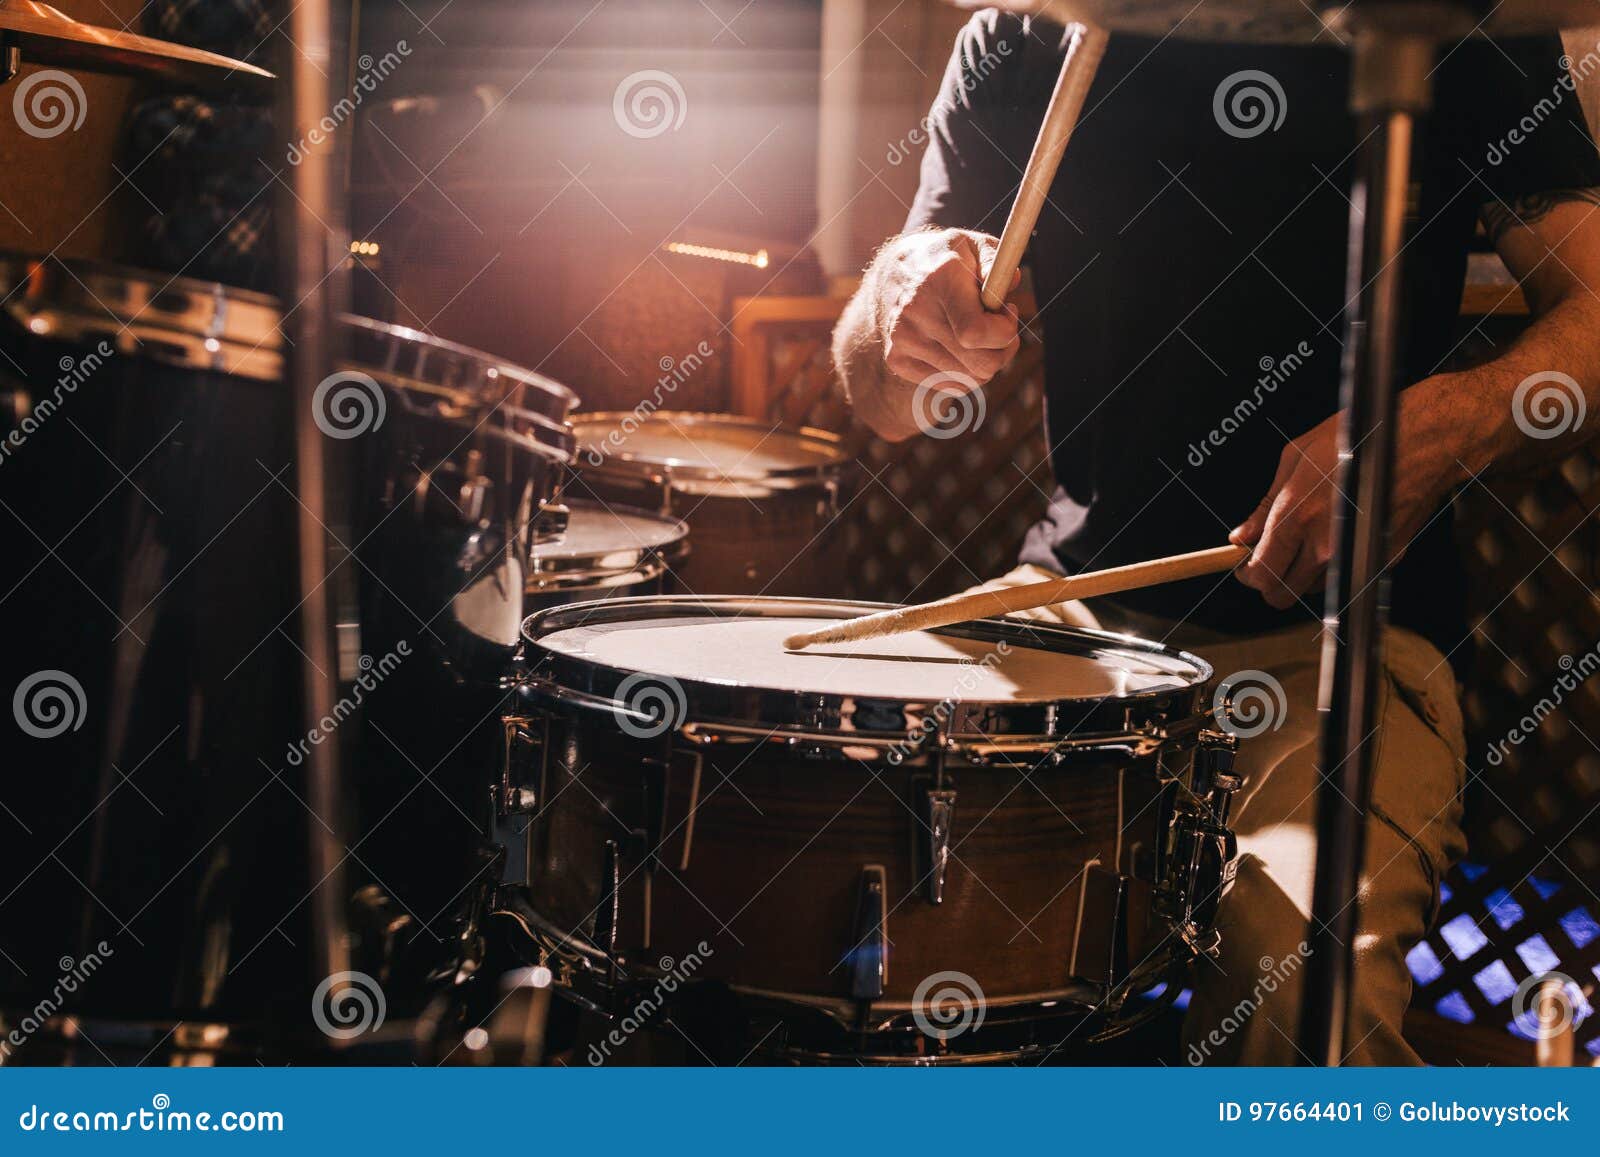 professional drum set closeup. drummer with drums